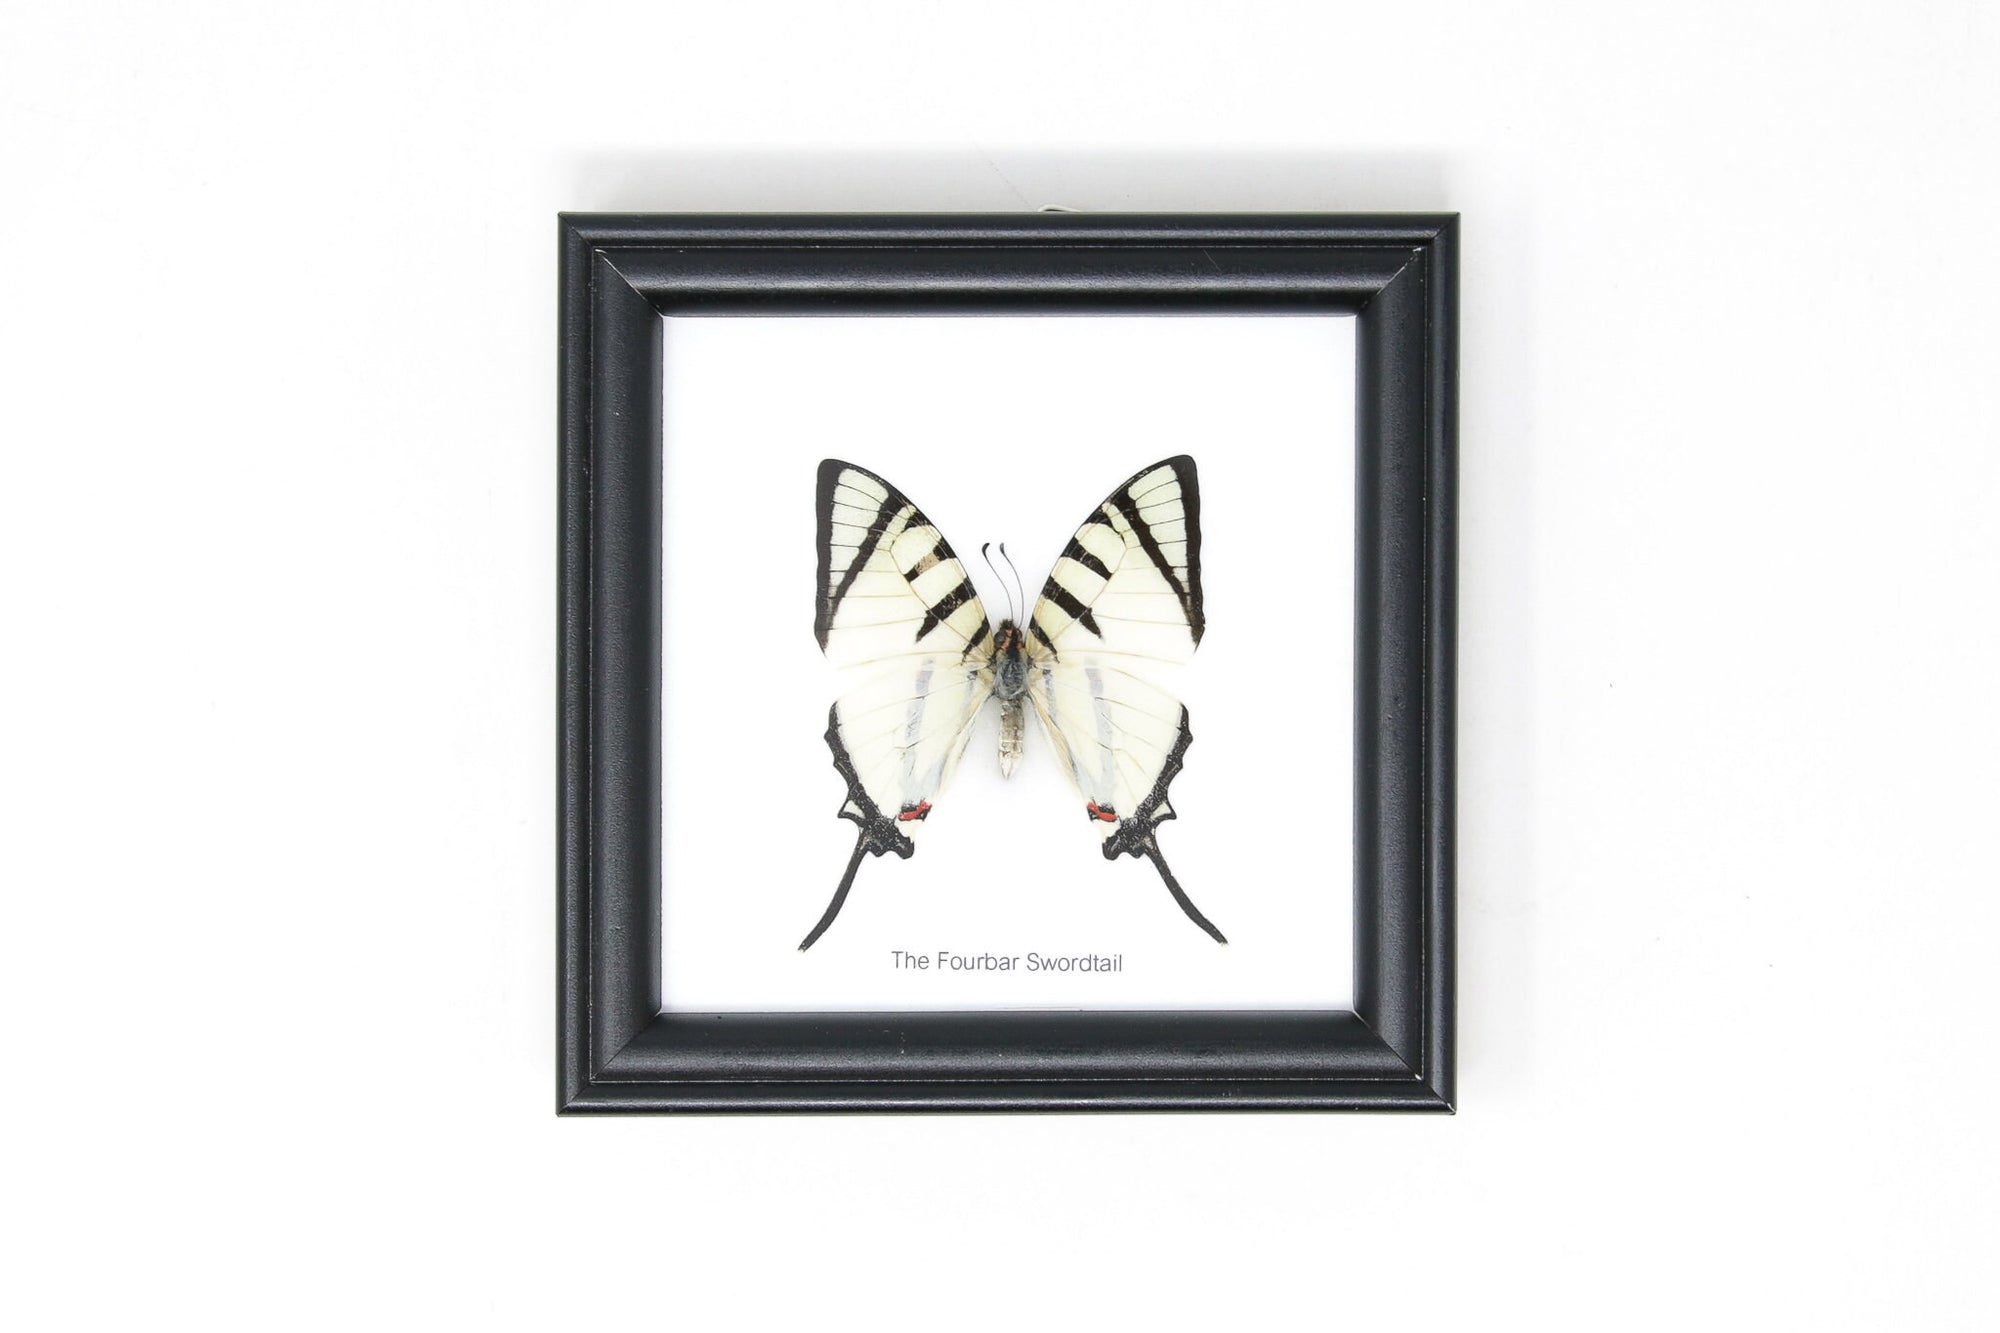 The Fourbar Swordtail Butterfly (Graphium sp.) | Real Butterfly Mounted Under Glass, Wall Hanging Home Décor Framed 5 x 5 In. Gift Boxed